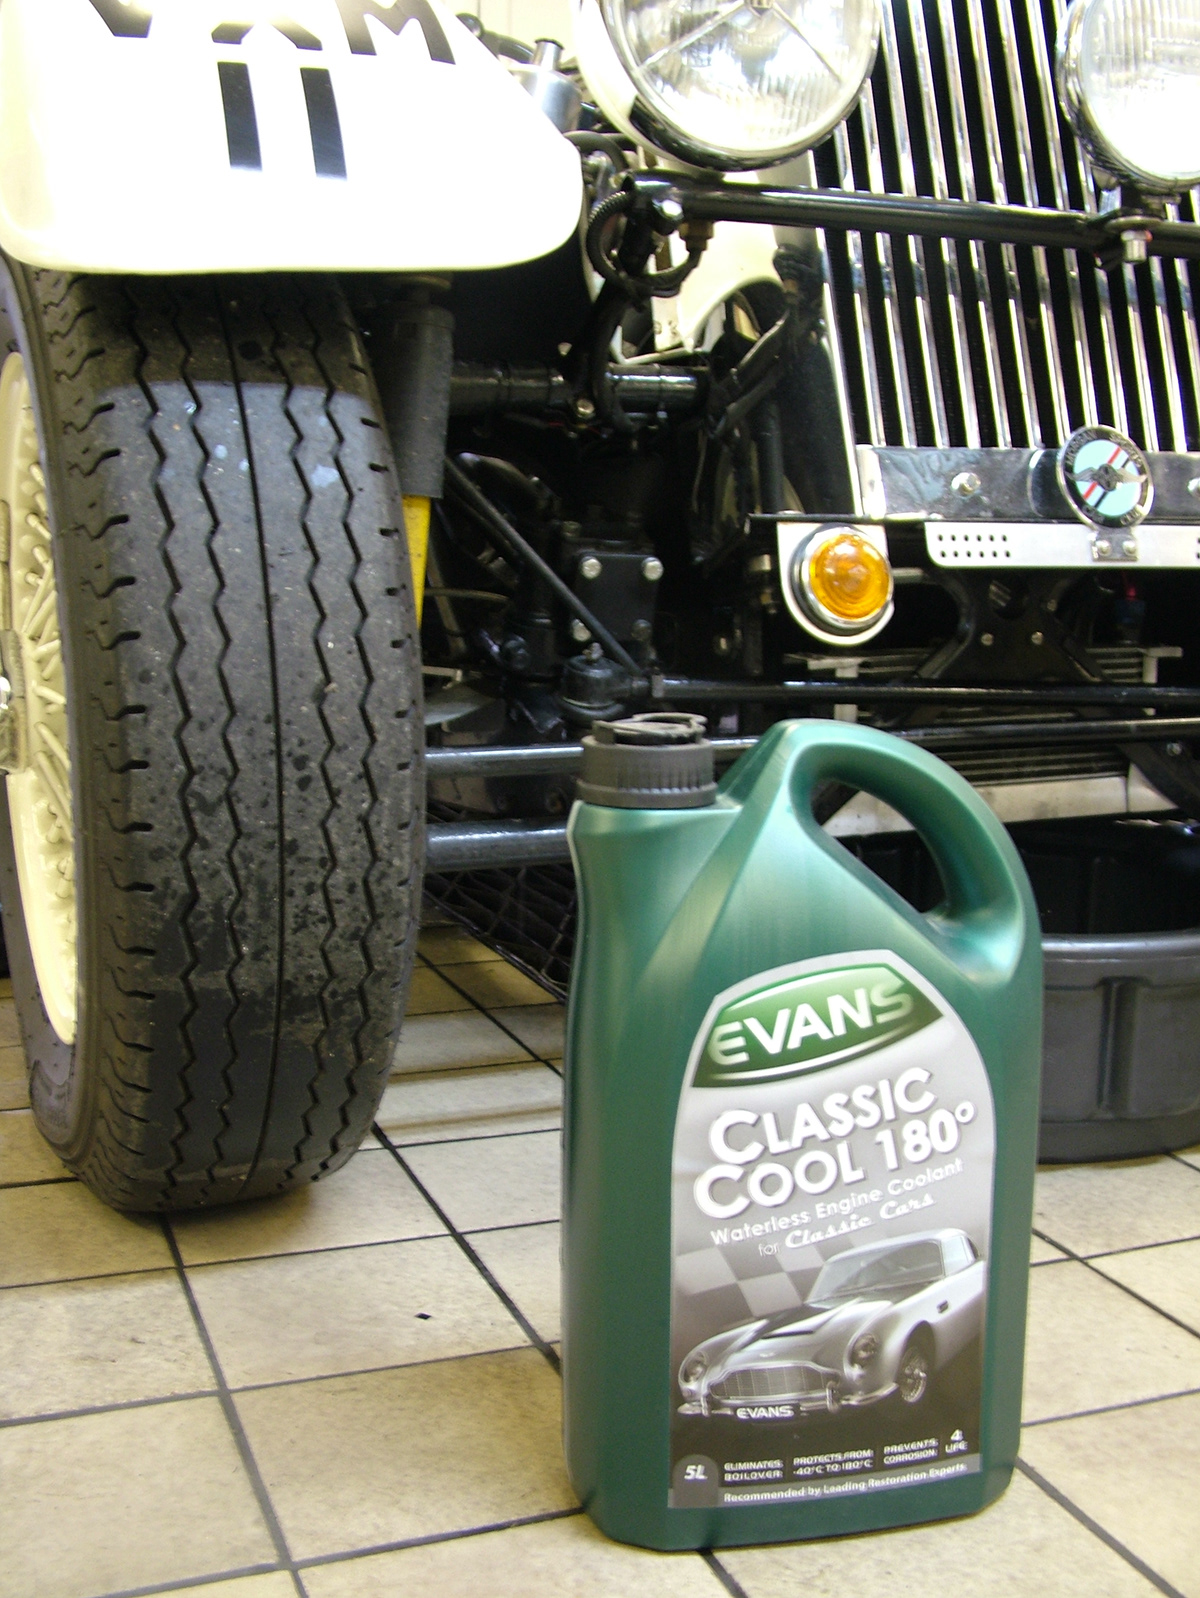 Evans waterless coolant product classic 180 Classic cool